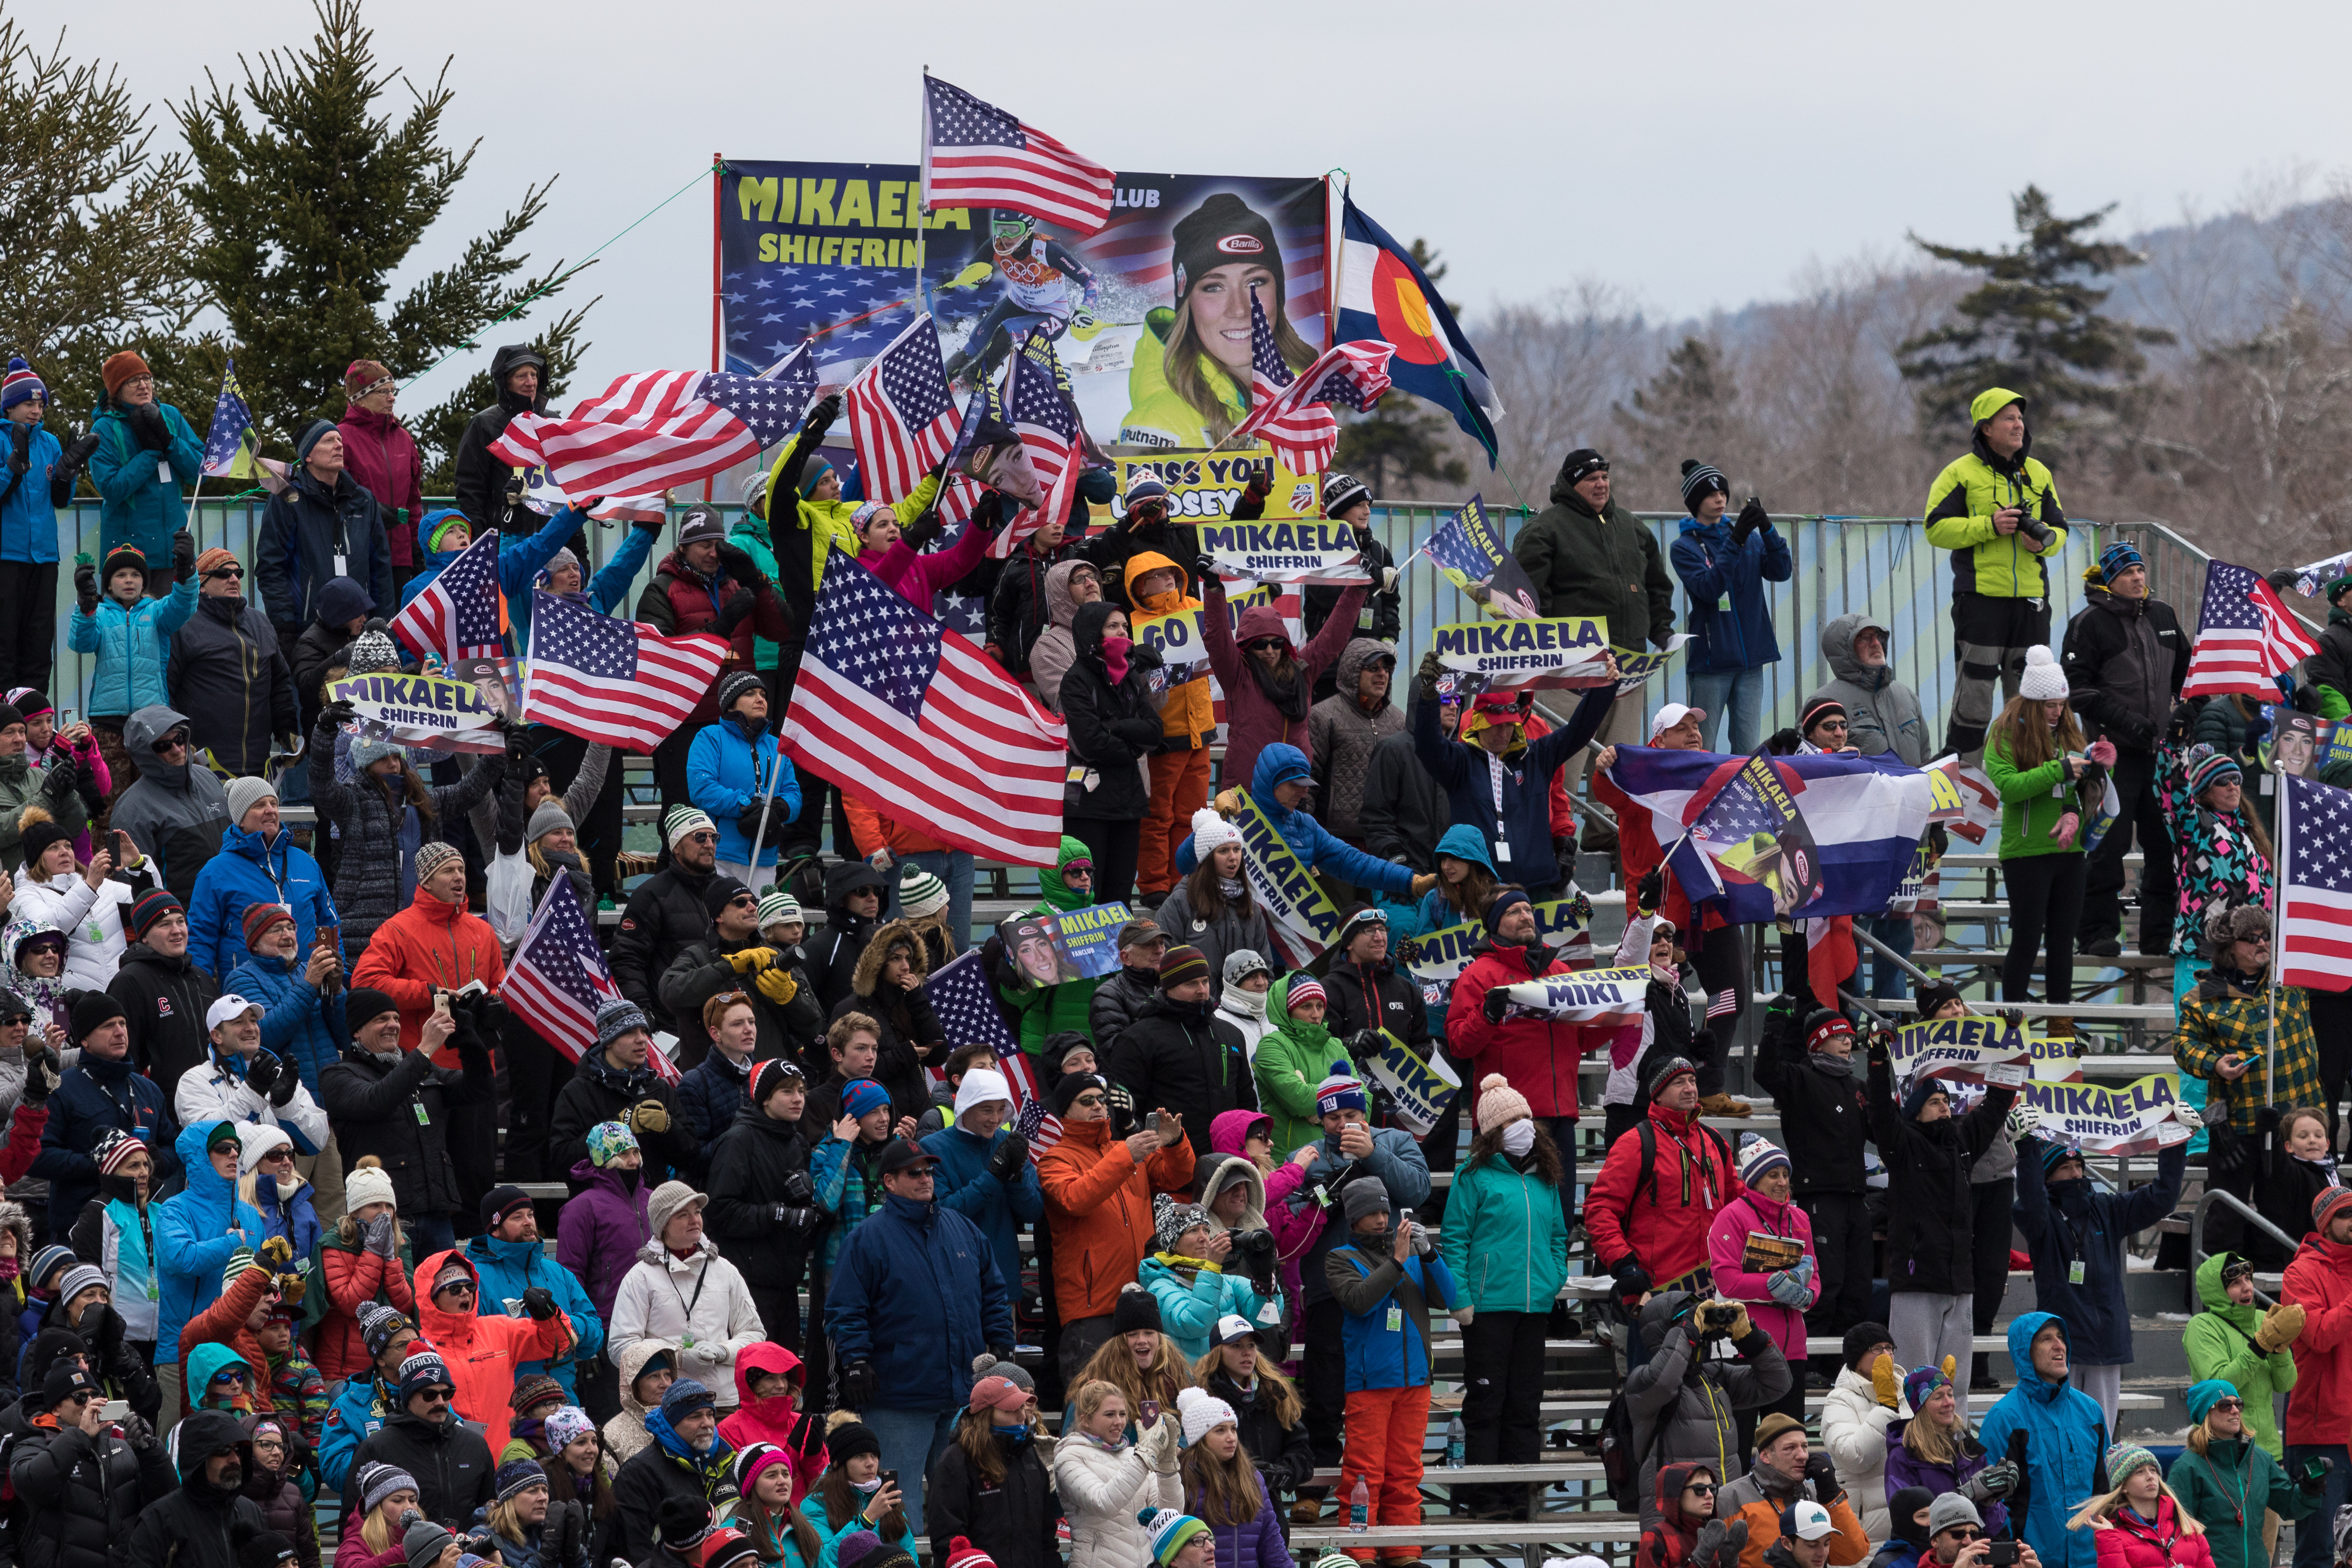 Born in Vail, Colorado, Mikaela Shiffrin is the reigning 2016 FIS Women's World Cup Champion. For good reason, she attracts fans everywhere she goes. Photo by David Young.